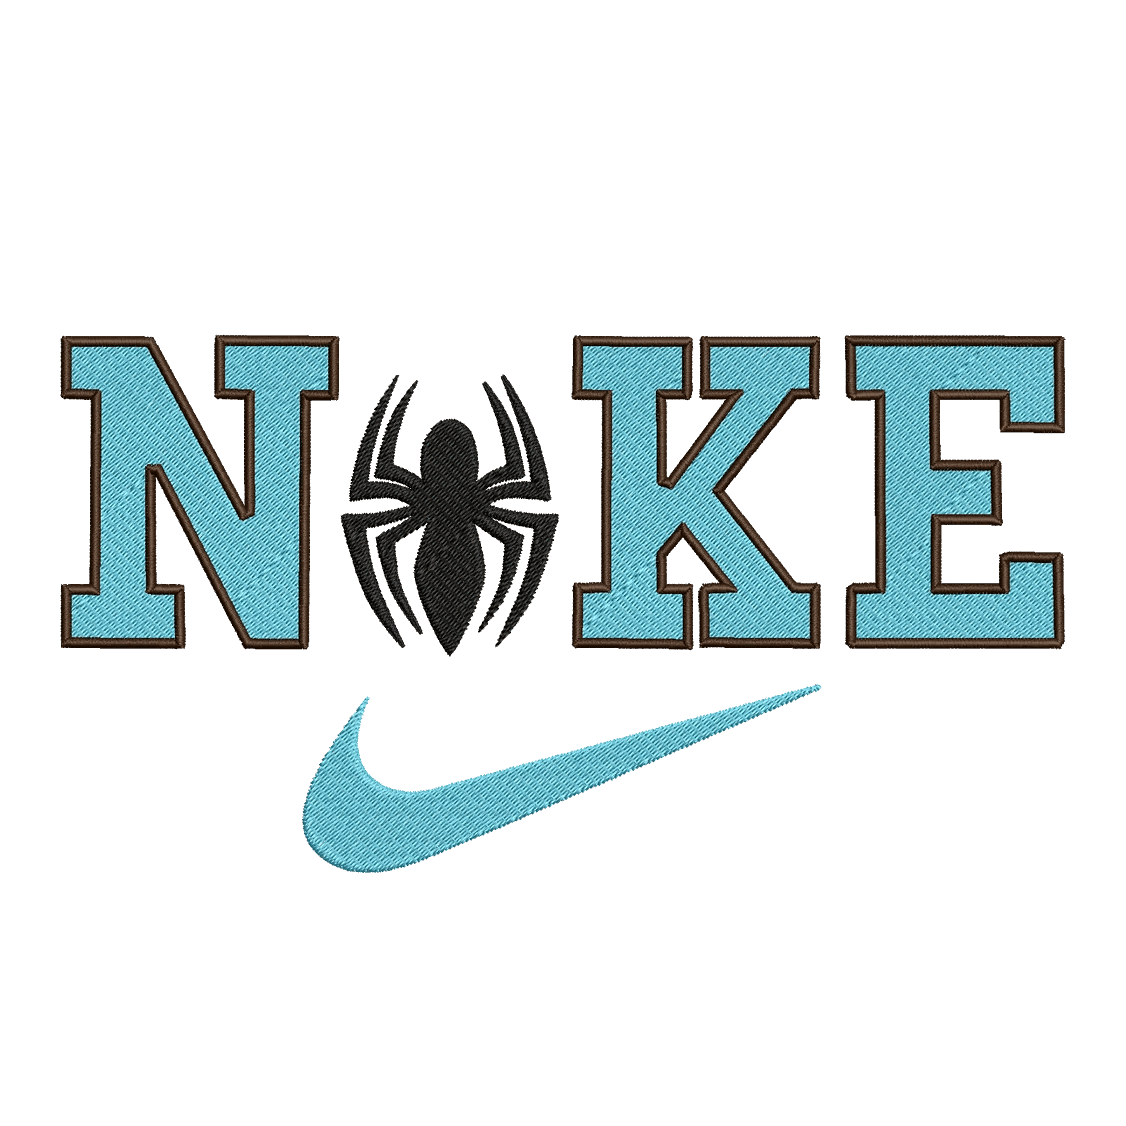 Nike and Spiderman 4 - Embroidery Design FineryEmbroidery